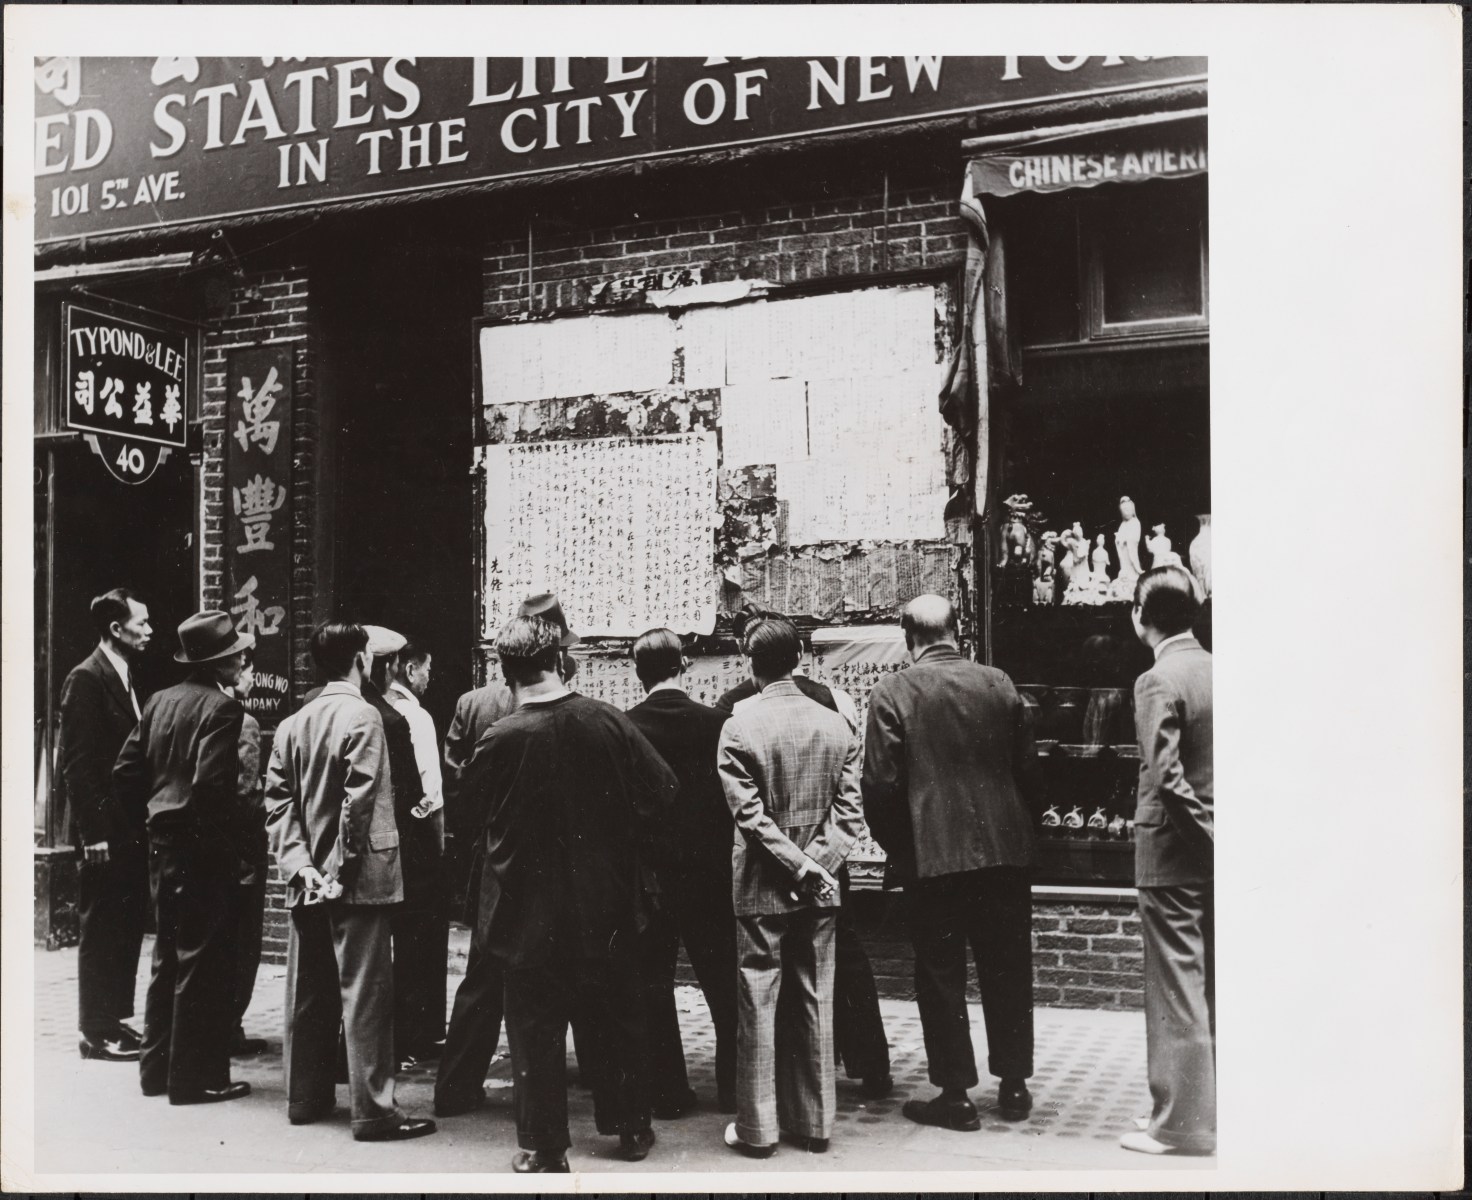 This was the heyday of print journalism and we have a few examples of foreign language papers in New York City. This photo shows people in Chinatown during the Second World War reading news from the war pasted on a wall. When newspapers couldn’t be printed or people didn't have access to them in large numbers, the news would just go up onto a board like this. That was a way in which the news was disseminated at this time.